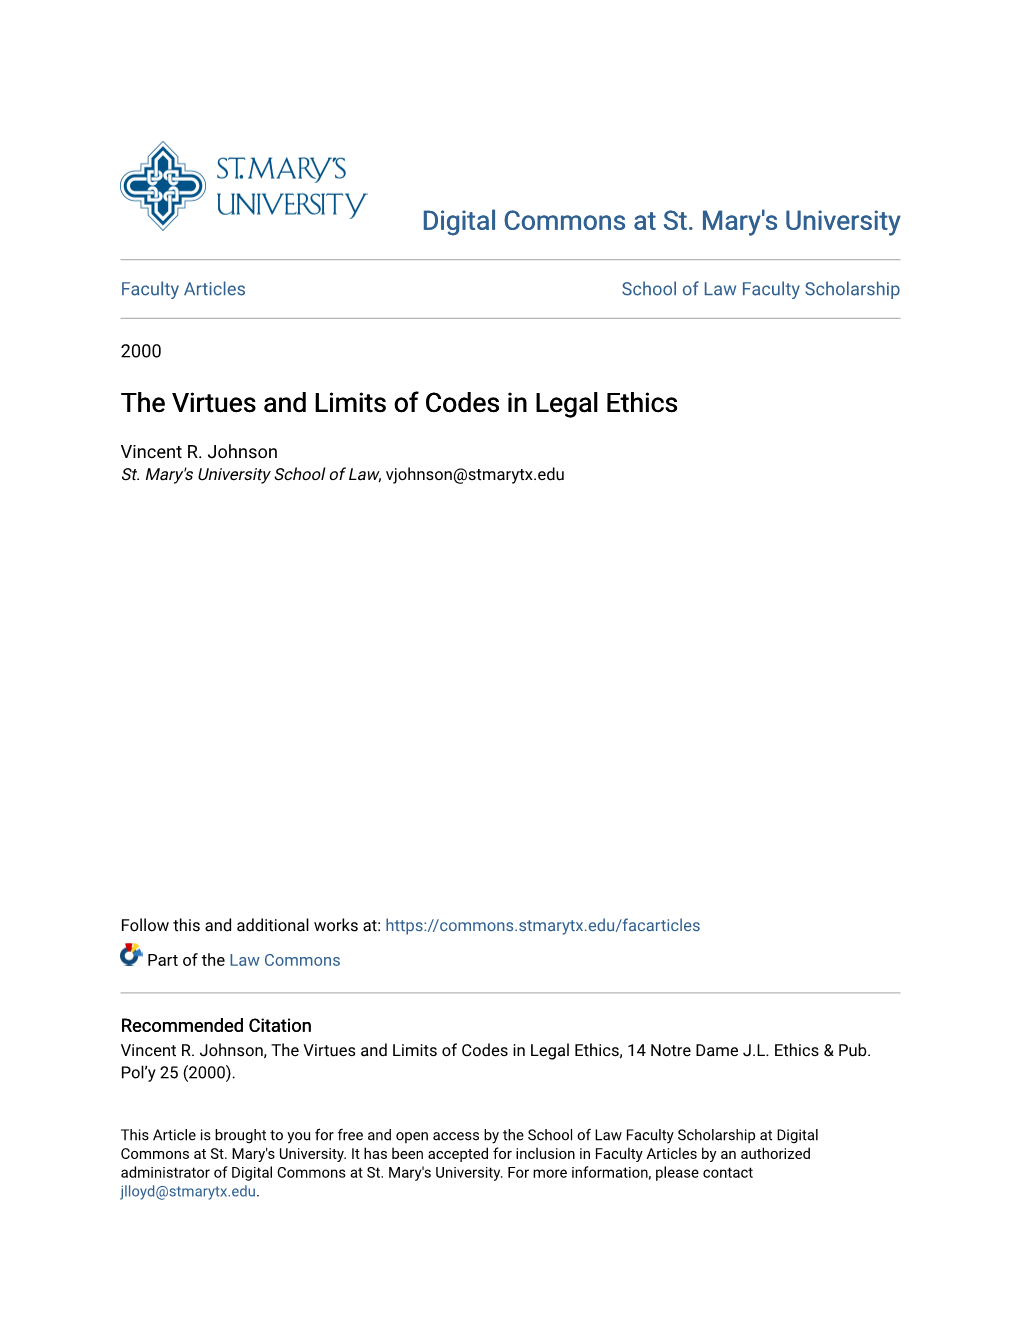 The Virtues and Limits of Codes in Legal Ethics